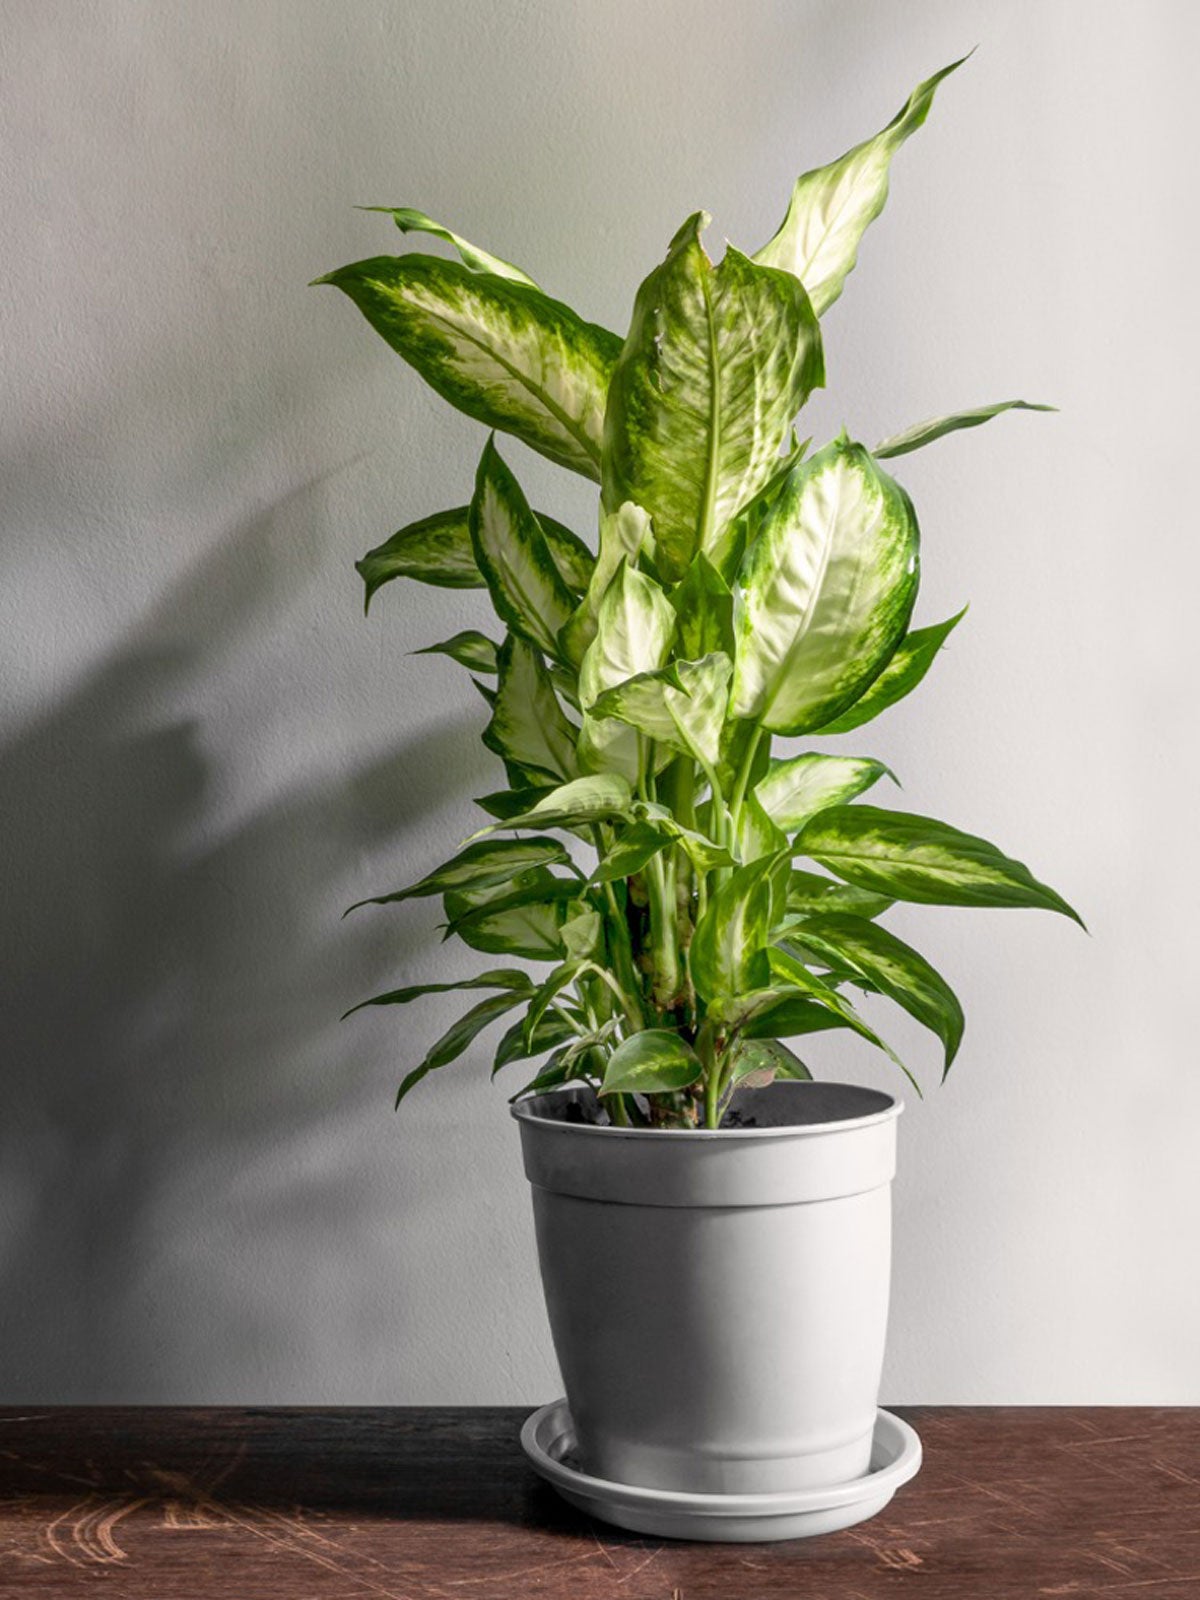 Overwintering Houseplants – Learn About Dieffenbachia Winter Care